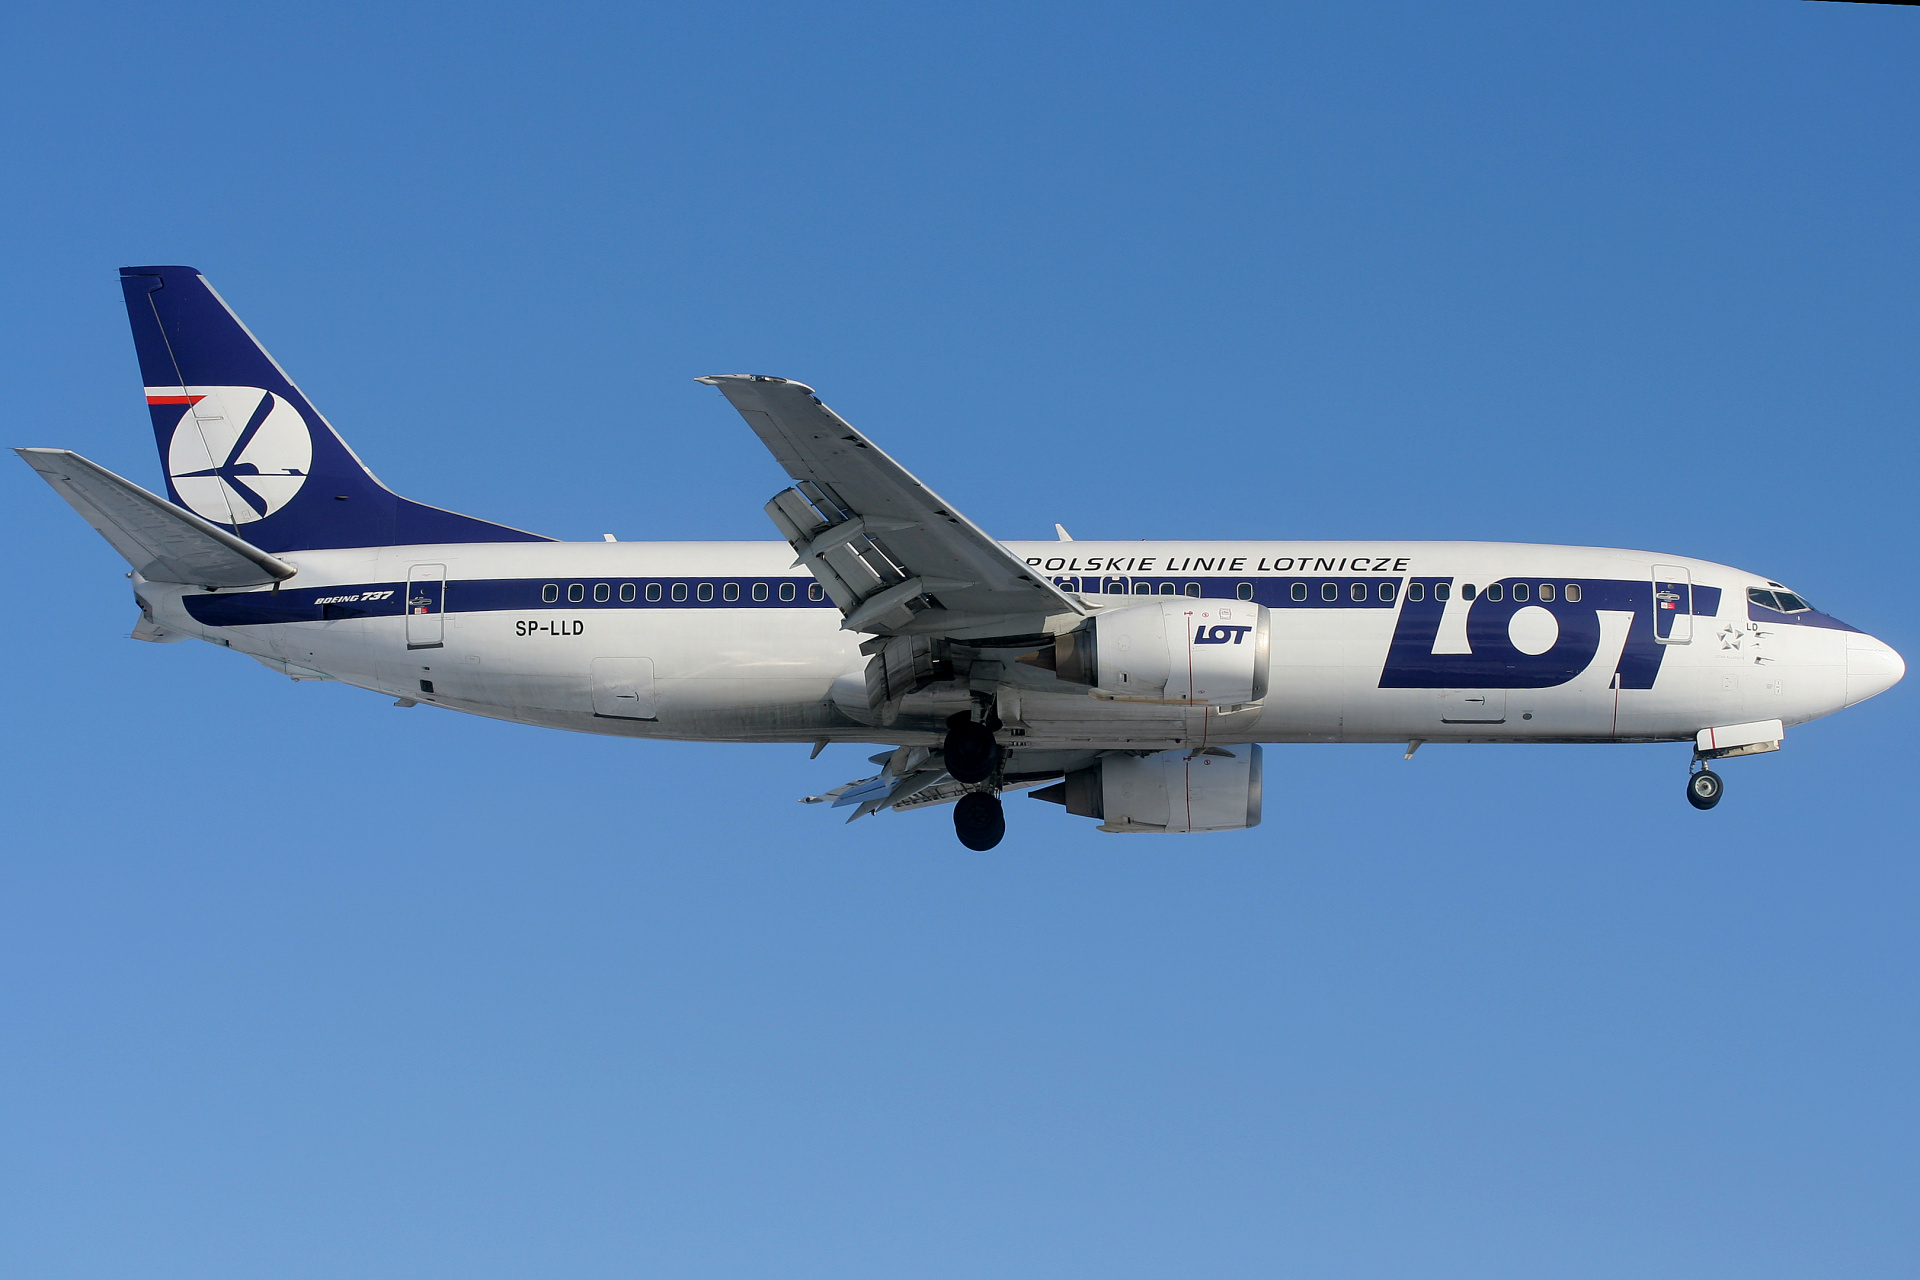 SP-LLD (Aircraft » EPWA Spotting » Boeing 737-400 » LOT Polish Airlines)